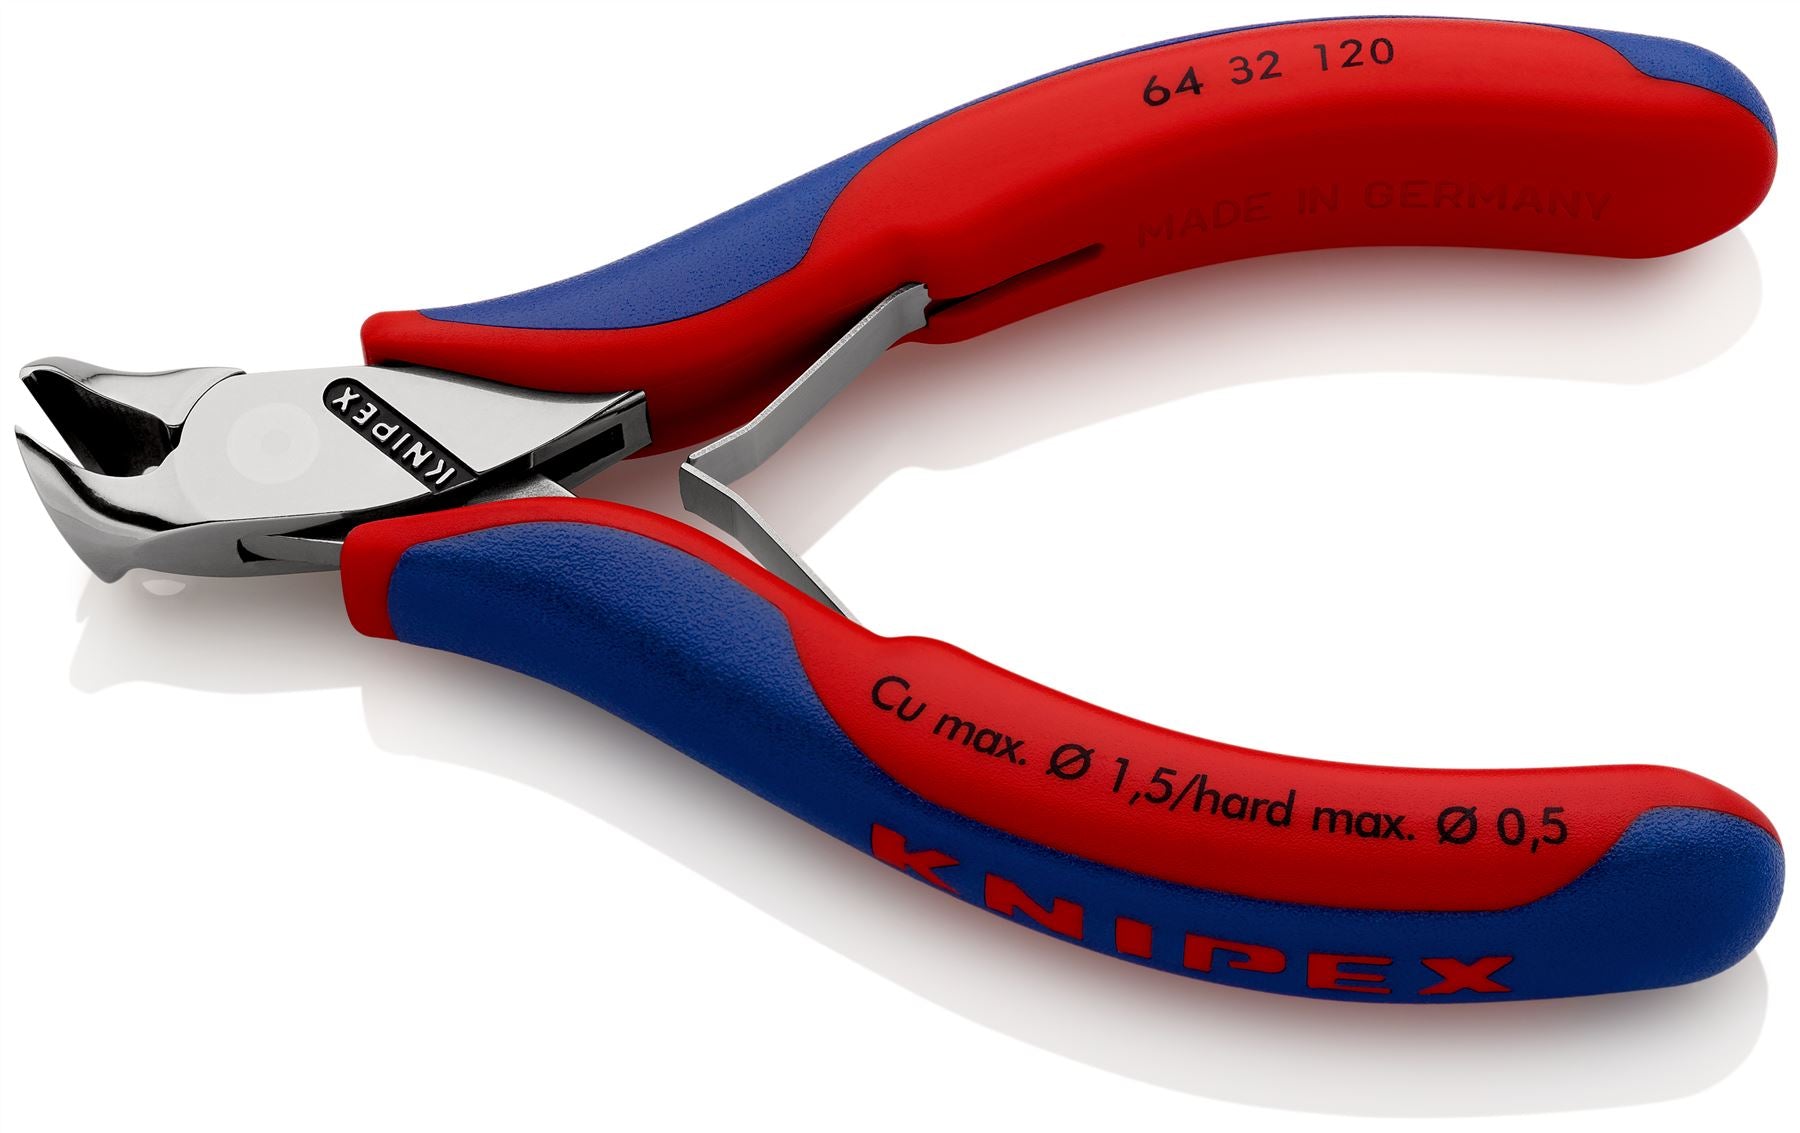 KNIPEX Precision Electronics End Cutting Nipper Pliers 15° Bend 120mm Multi Component Grips 64 32 120